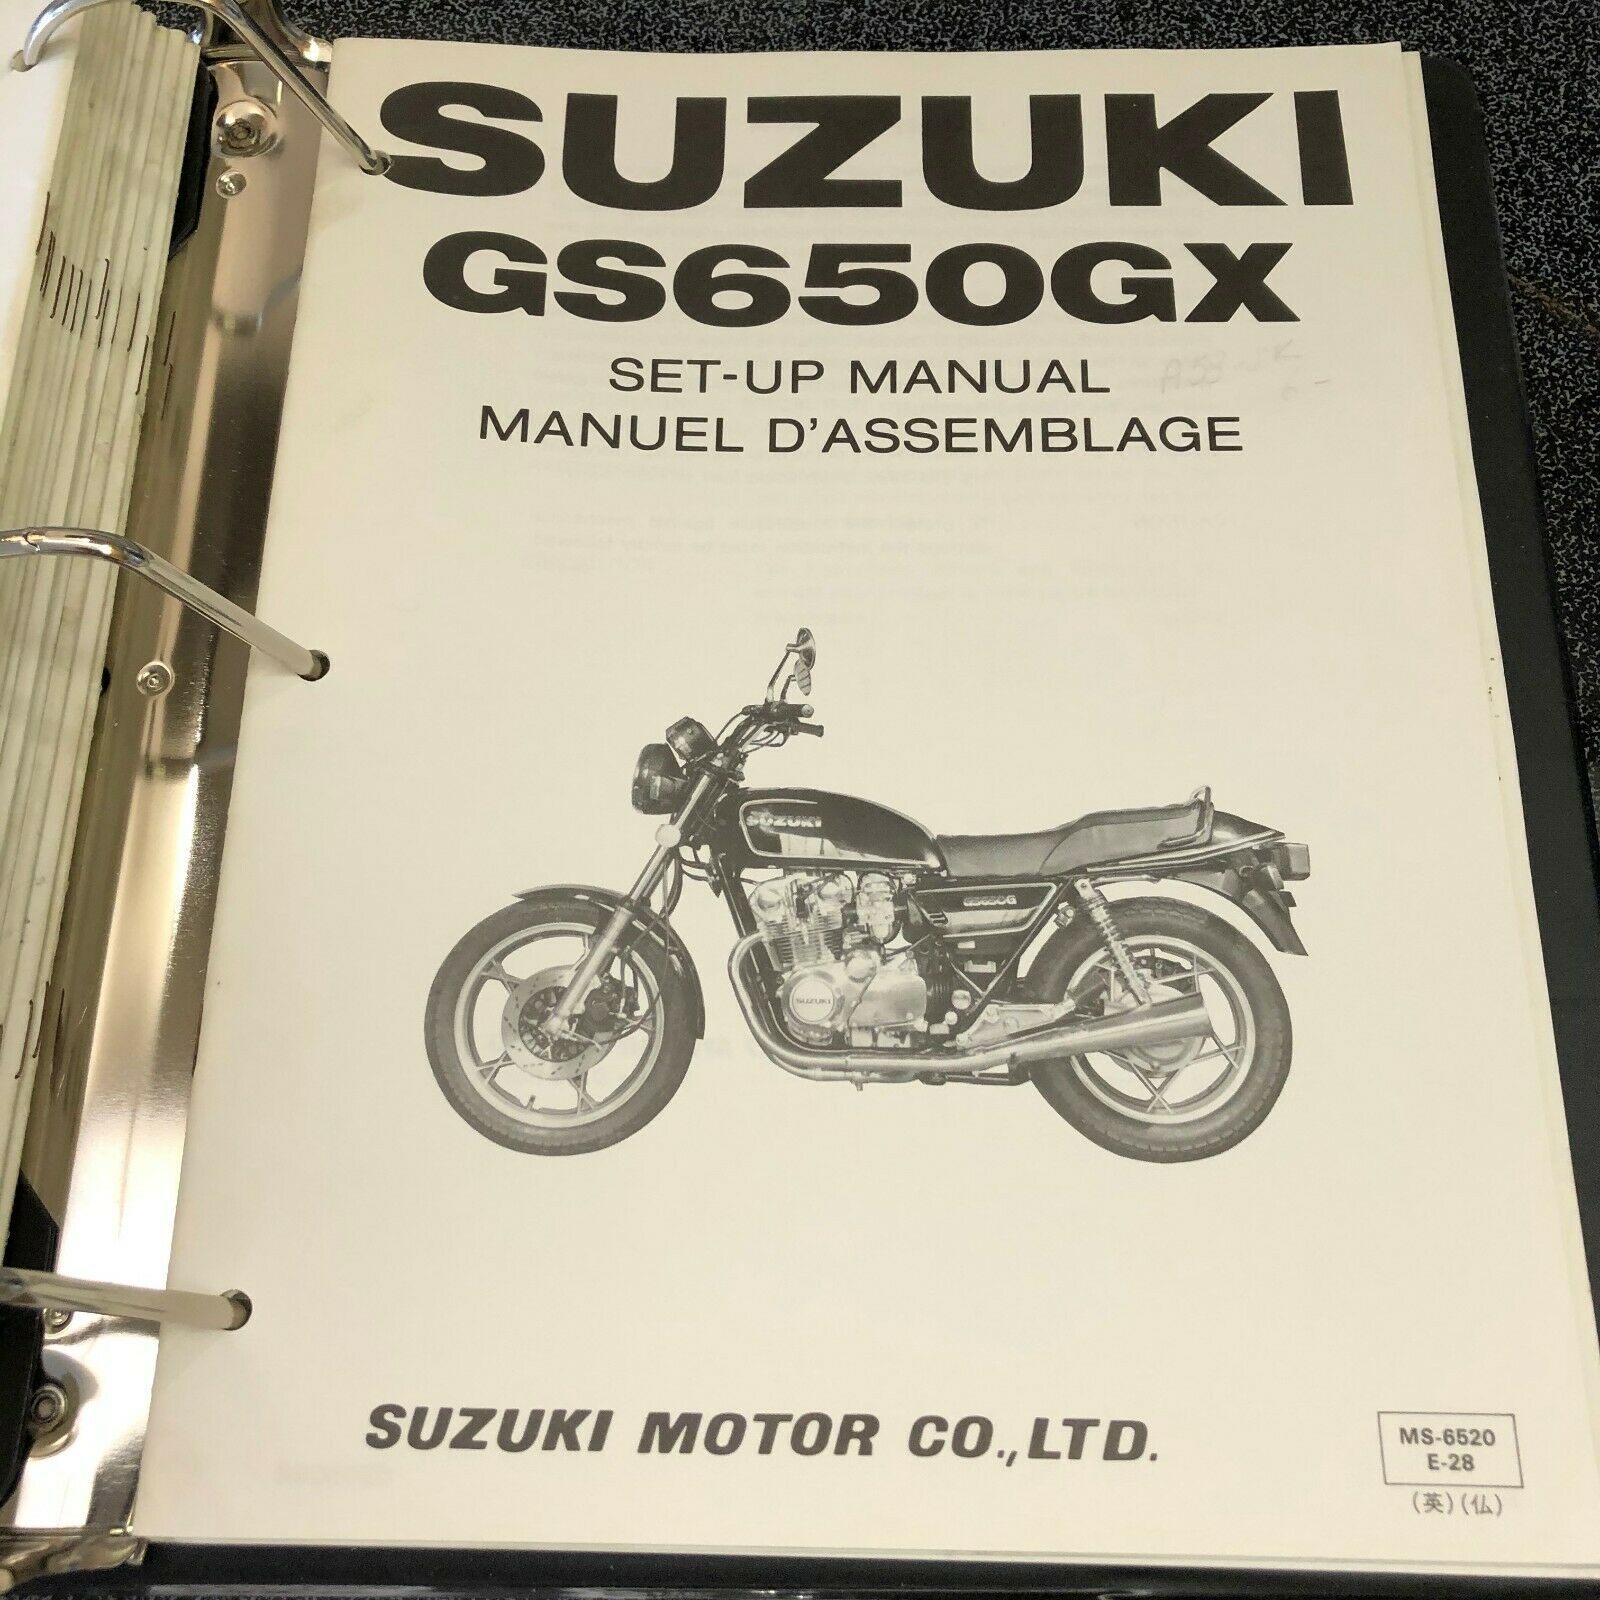 Suzuki Set-up Manual For Gs650gx March 1981 Printed In Japan In English